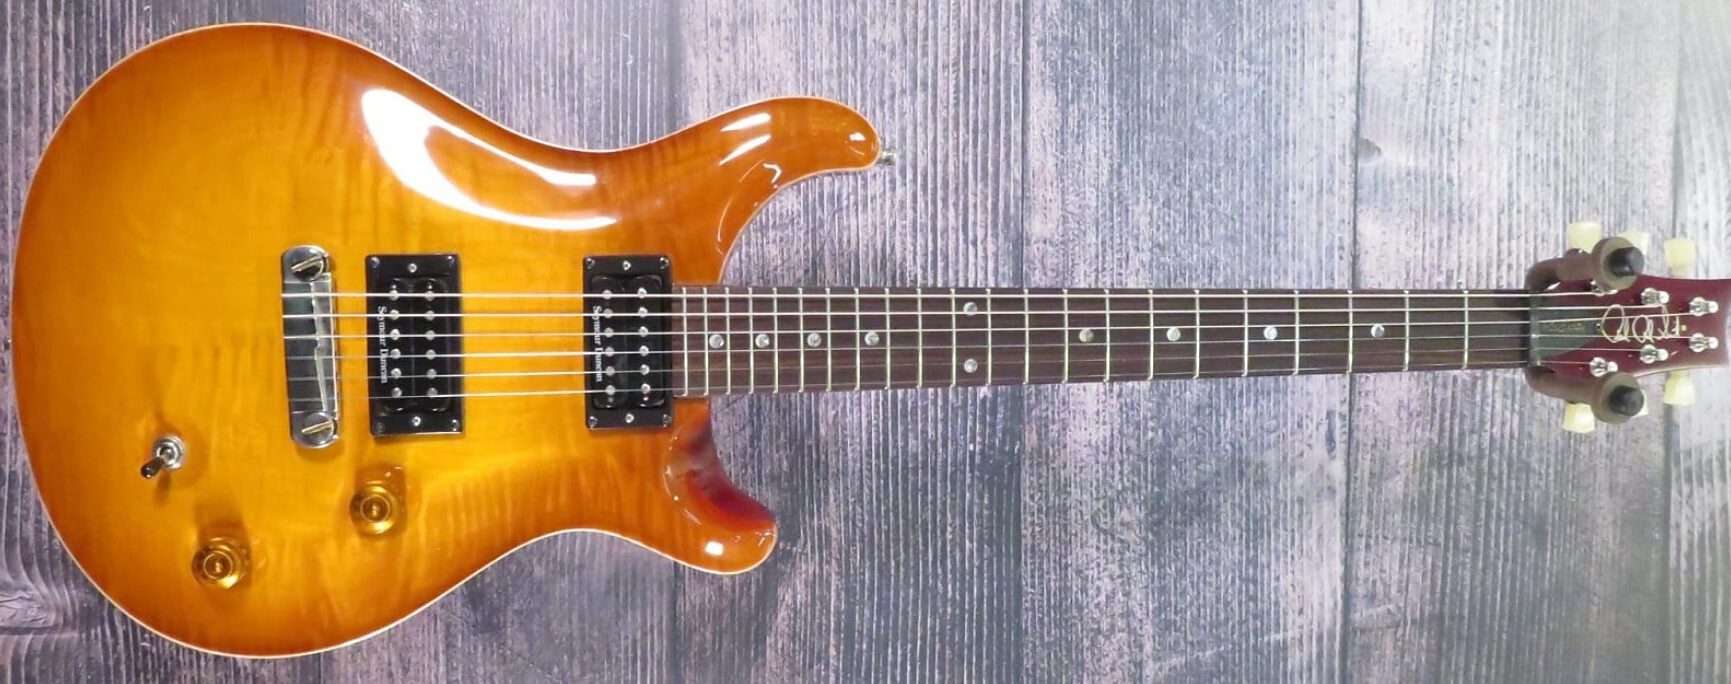 Paul Reed Smith McCarty guitar review